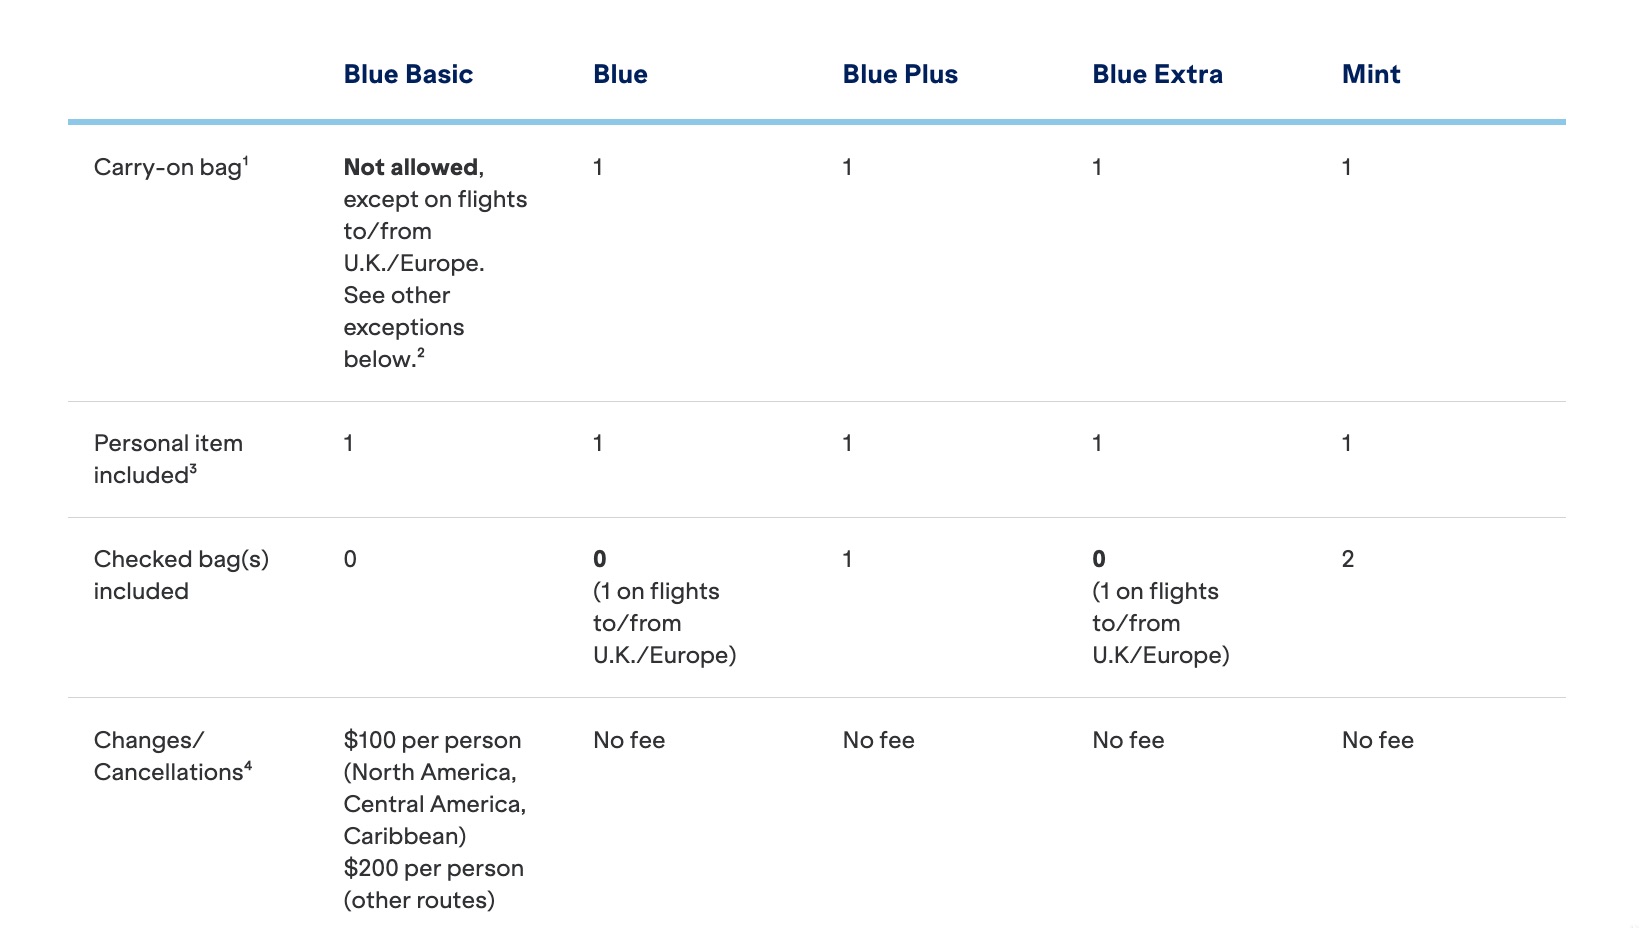 JetBlue economy and mint restrictions